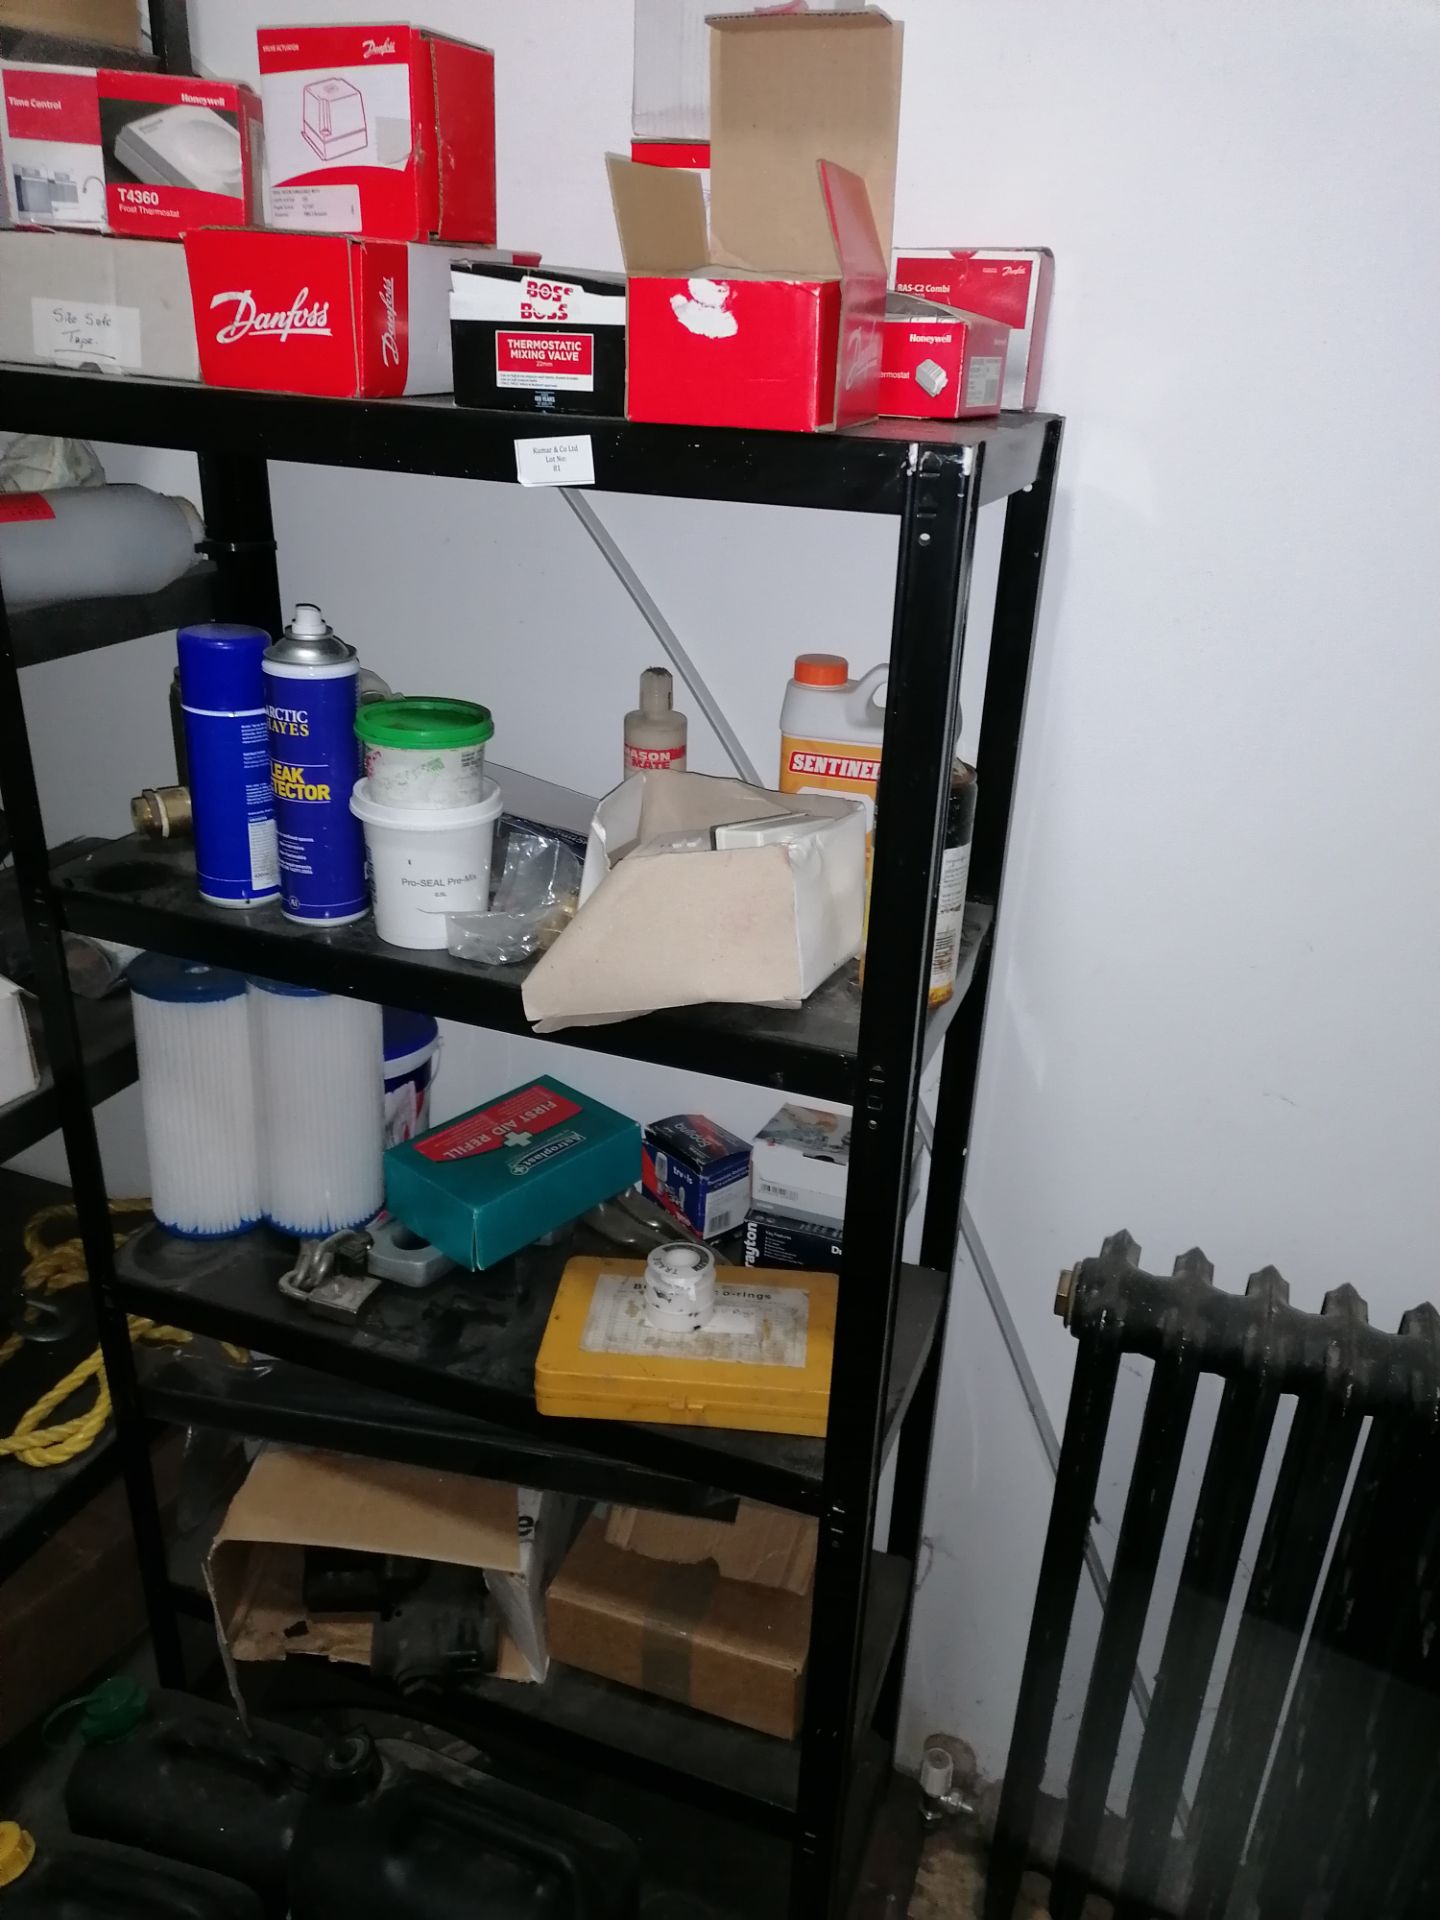 4 Tier metal shelving unit including contents as shown